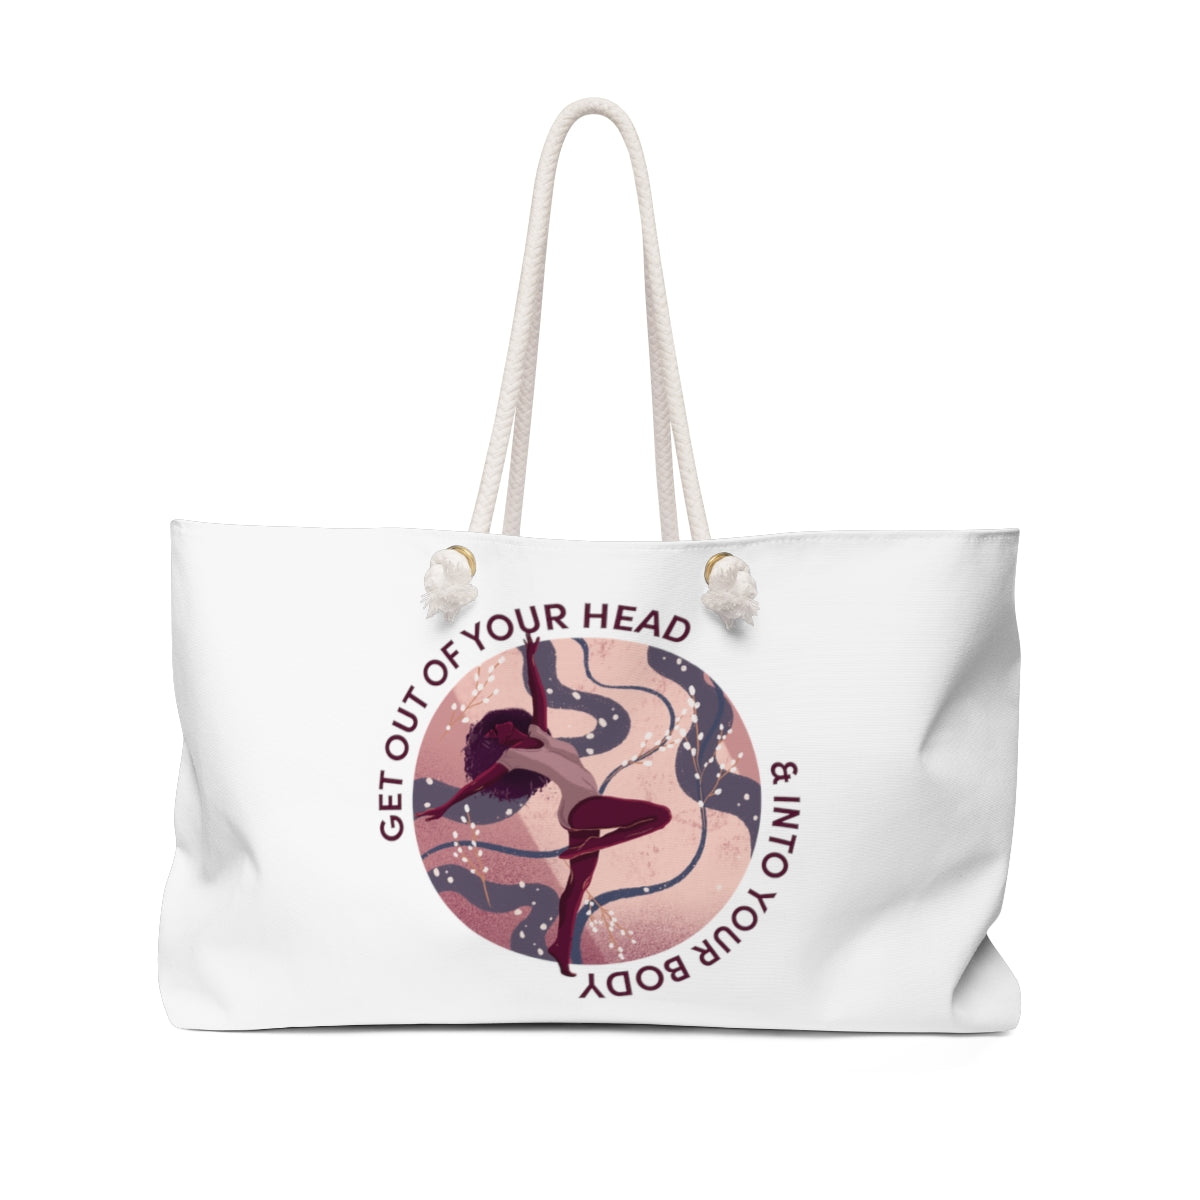 Get Out of Your Head - BL - Weekender Bag